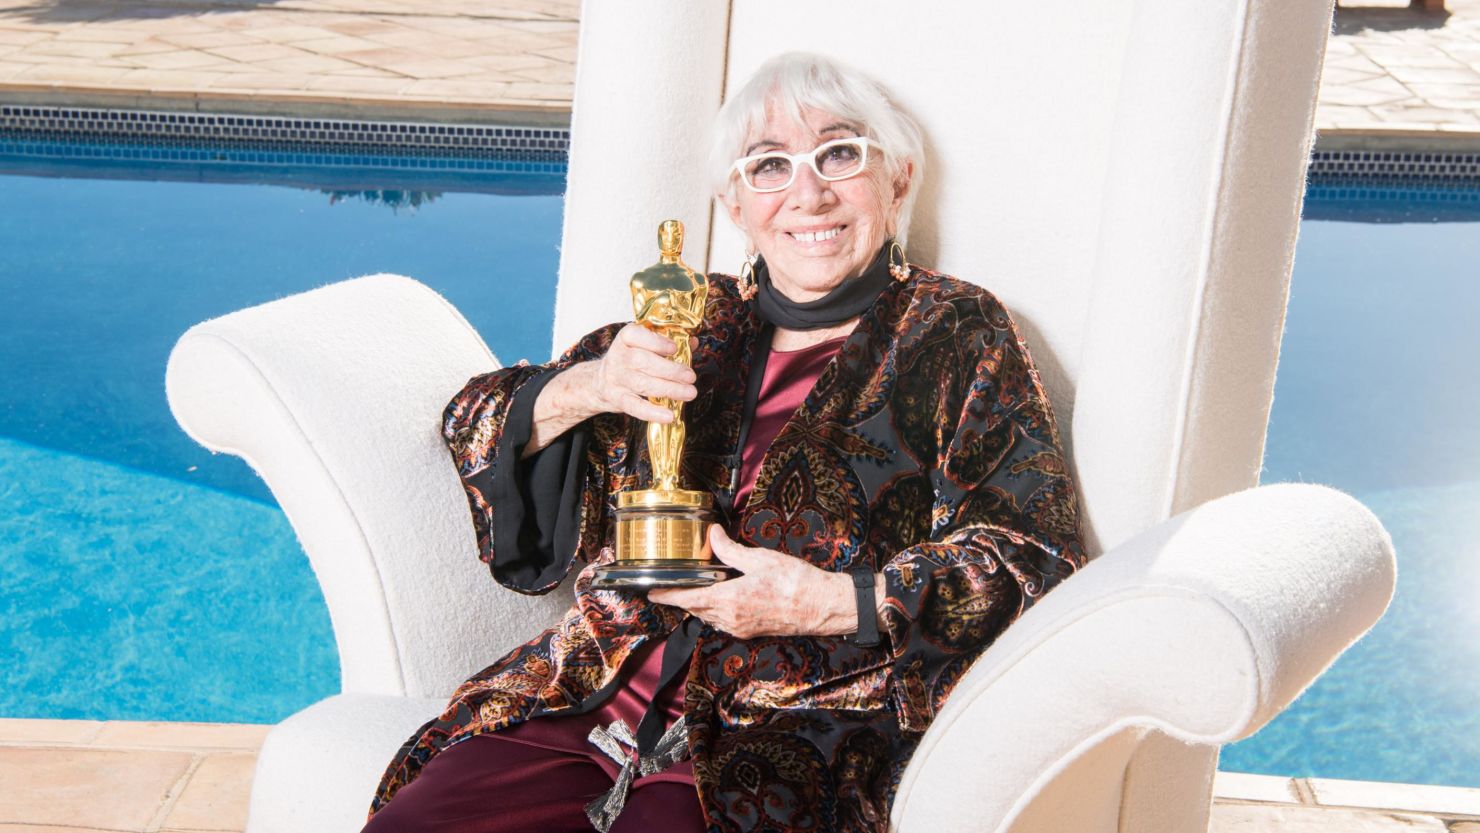 Acclaimed filmmaker Lina Wertmuller, posing in 2019 with her honorary Oscar, has died at age 93, according to Italy's Ministry of Culture.